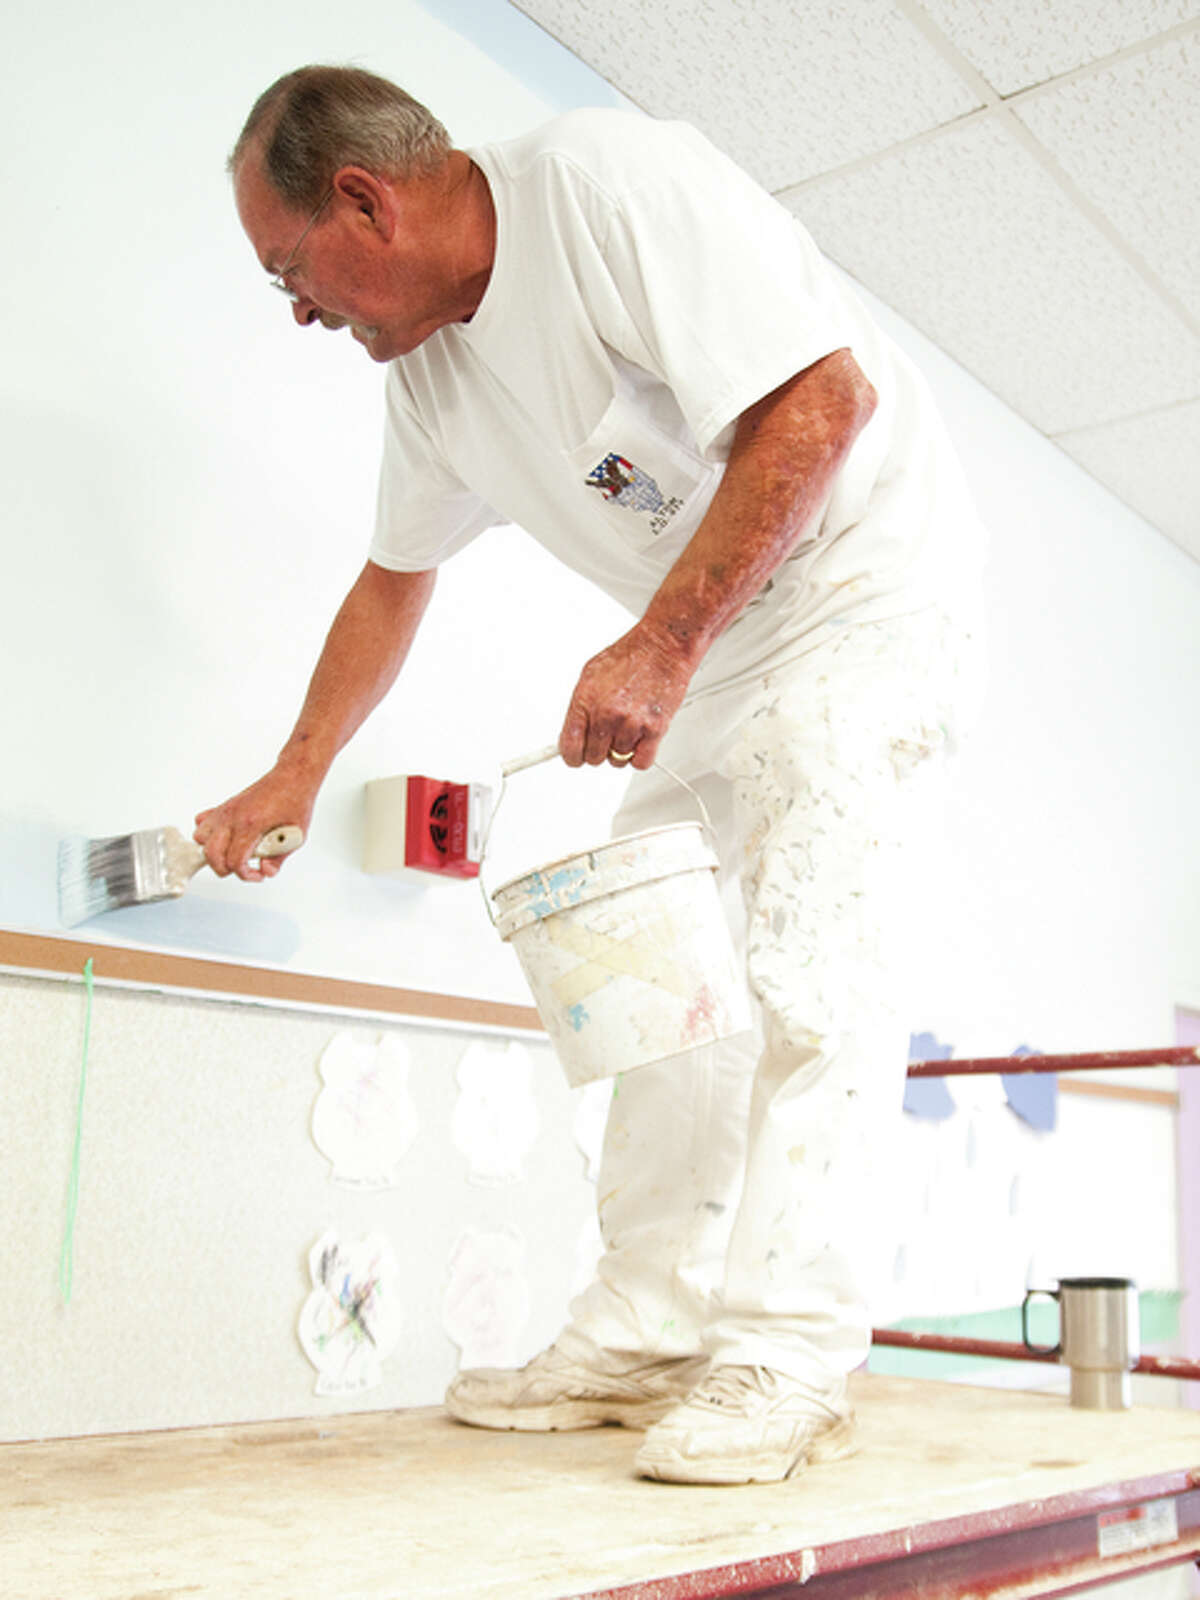 Cy Austin volunteered his time to help paint one of the rooms on Saturday morning at the Alton Day Care Center-Mckinley Site.